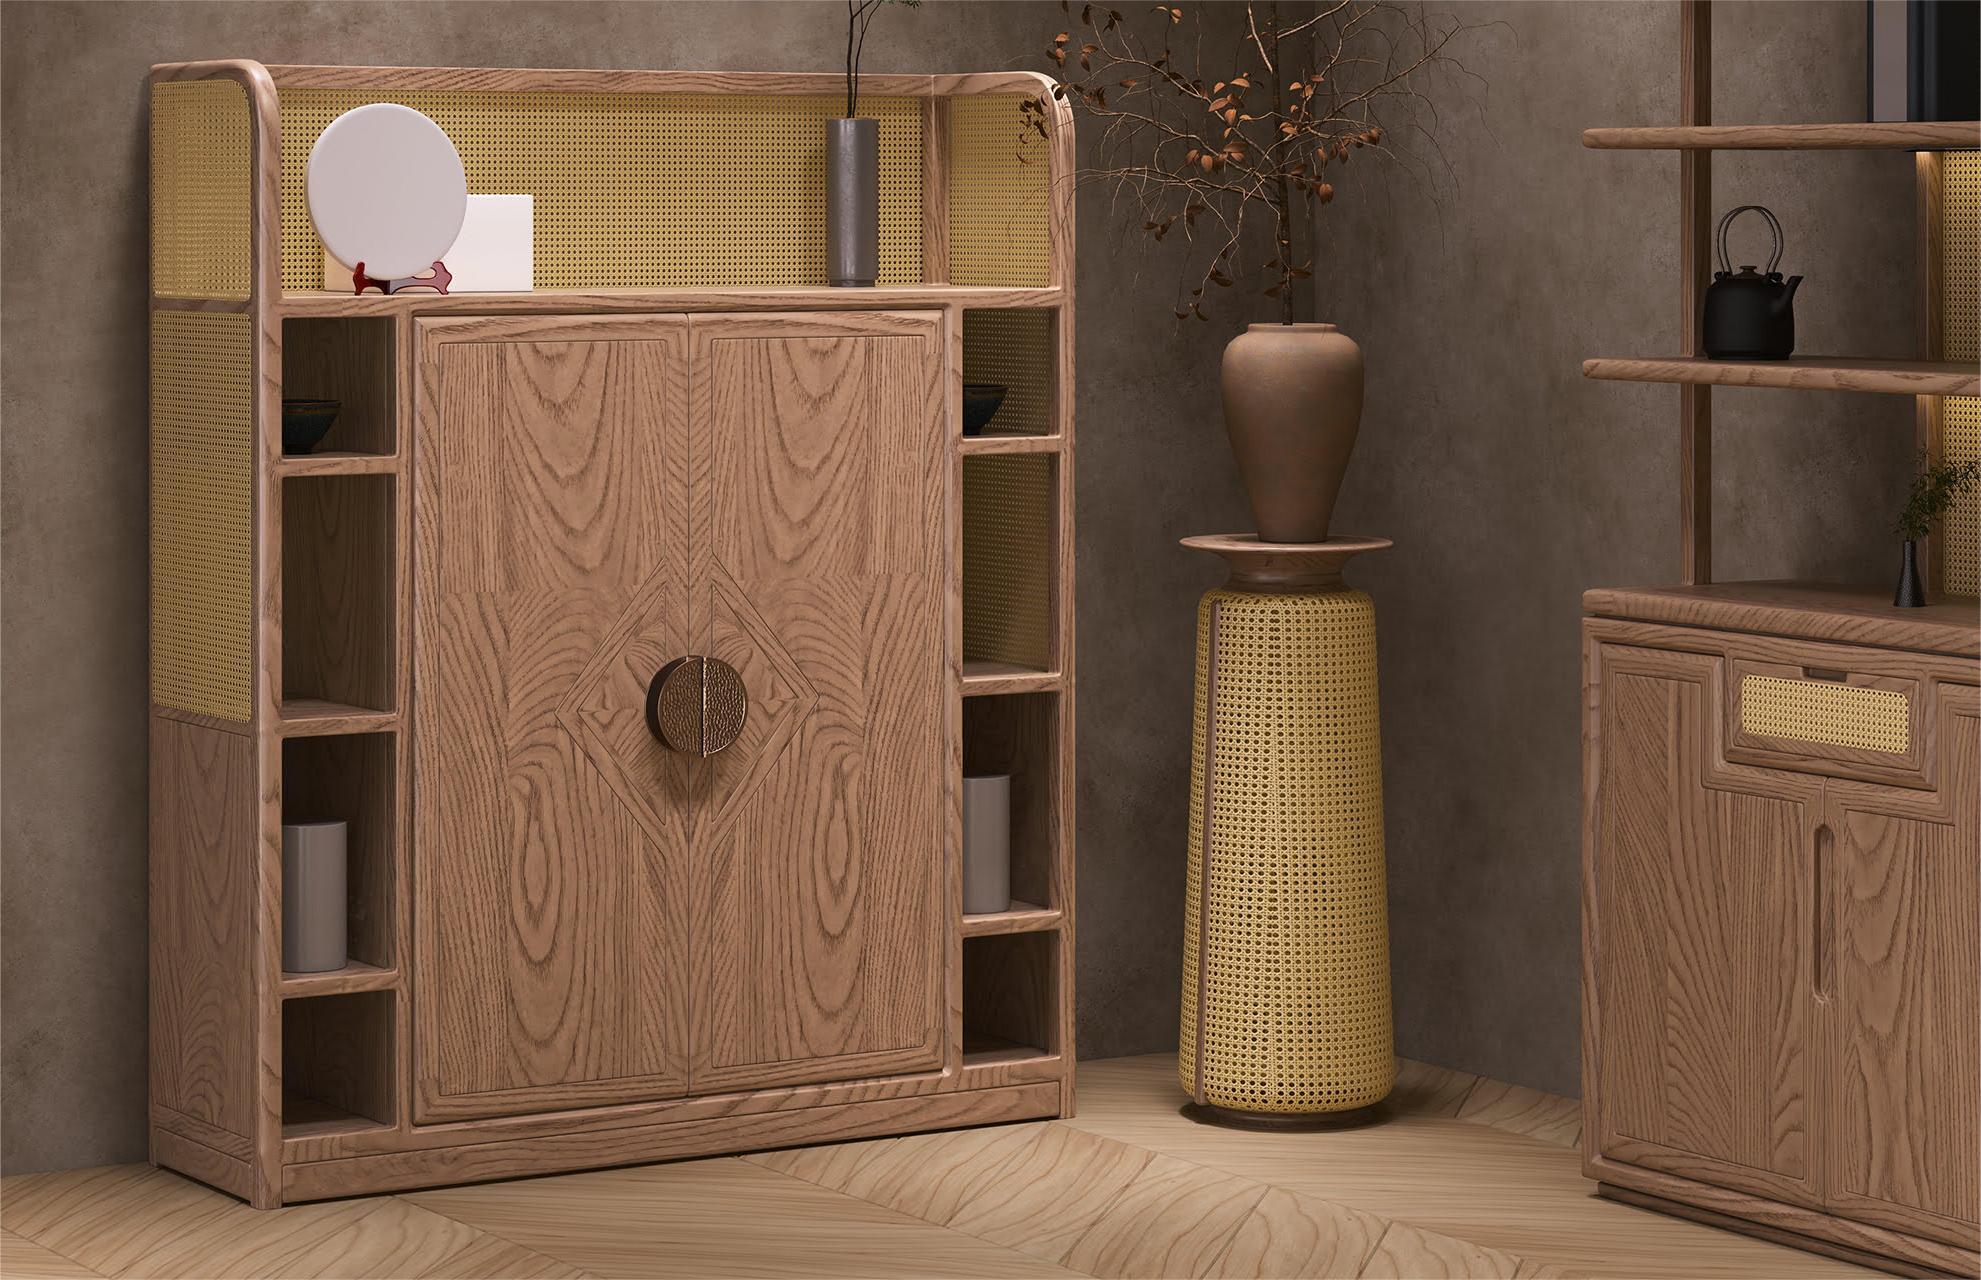 TBG-G04 natrual wood rattan sideboard cupboard cabinet unique modern natrual solid wood rattan dining room buffet console cabinet buffect cabinet,console cabinet,cupboard,sidebaord,living room cabinet\